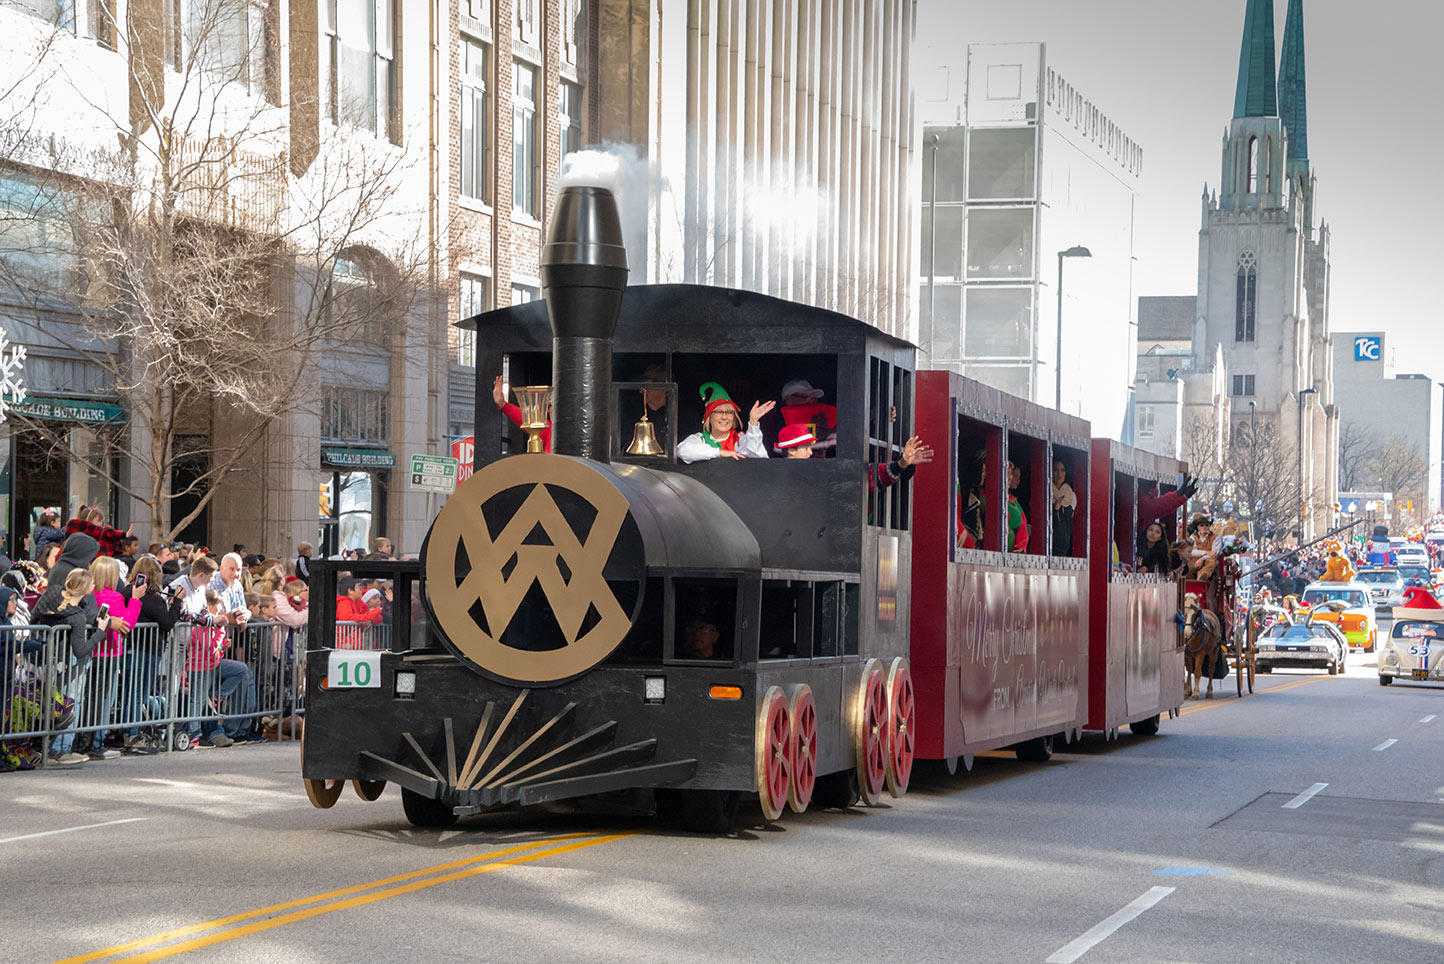 The Tulsa Christmas Parade Presented by American Waste Control